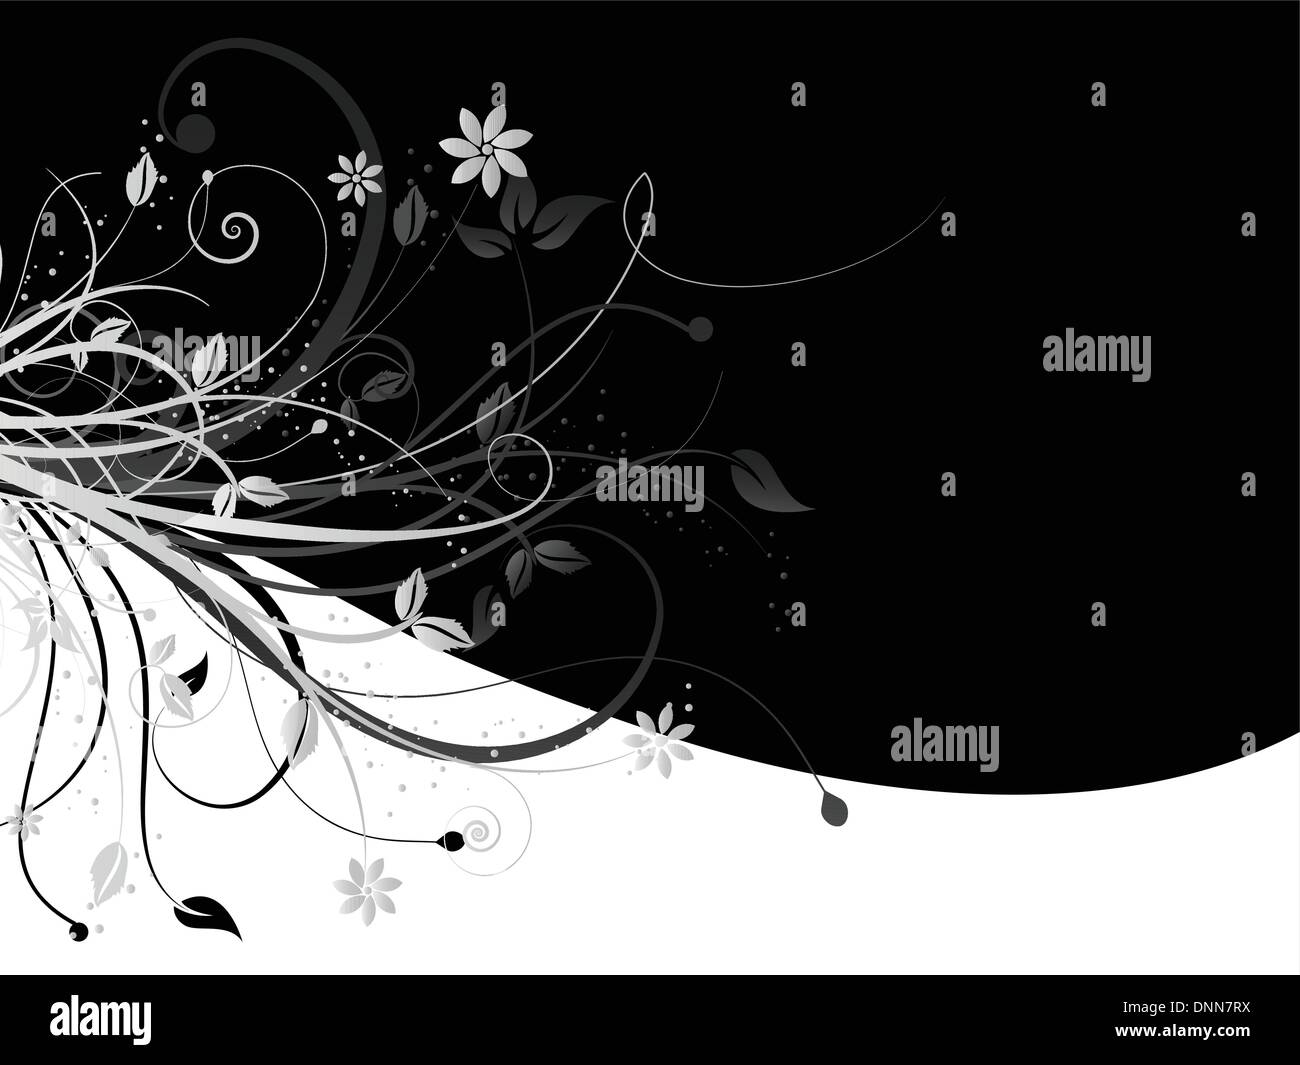 Decorative abstract floral background Stock Vector